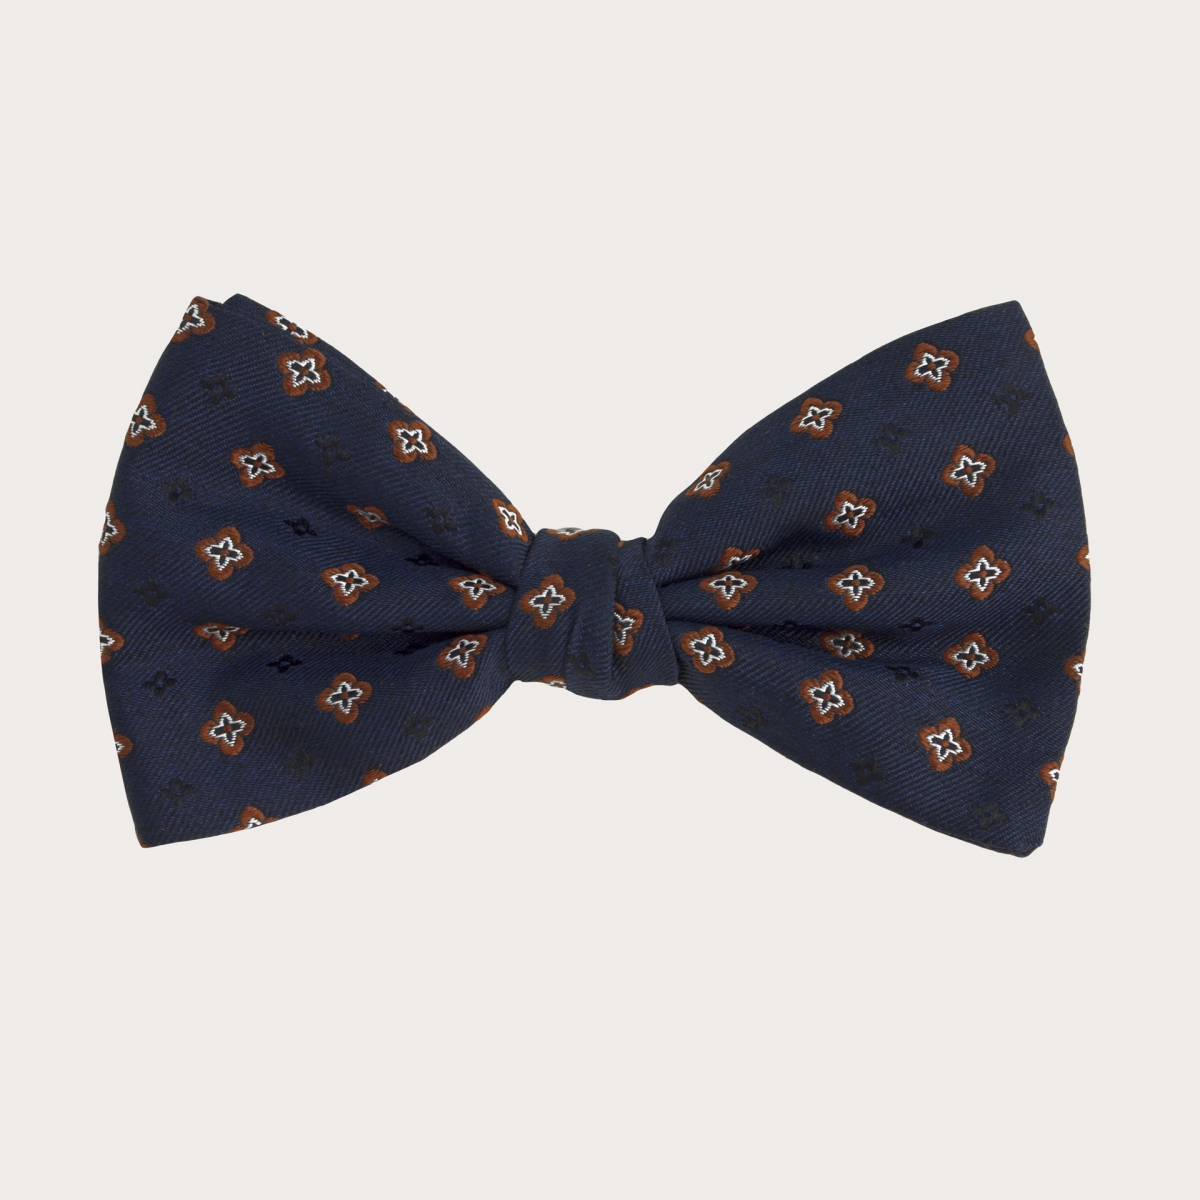 BRUCLE Formal bow tie in jacquard silk, blue with brown pattern